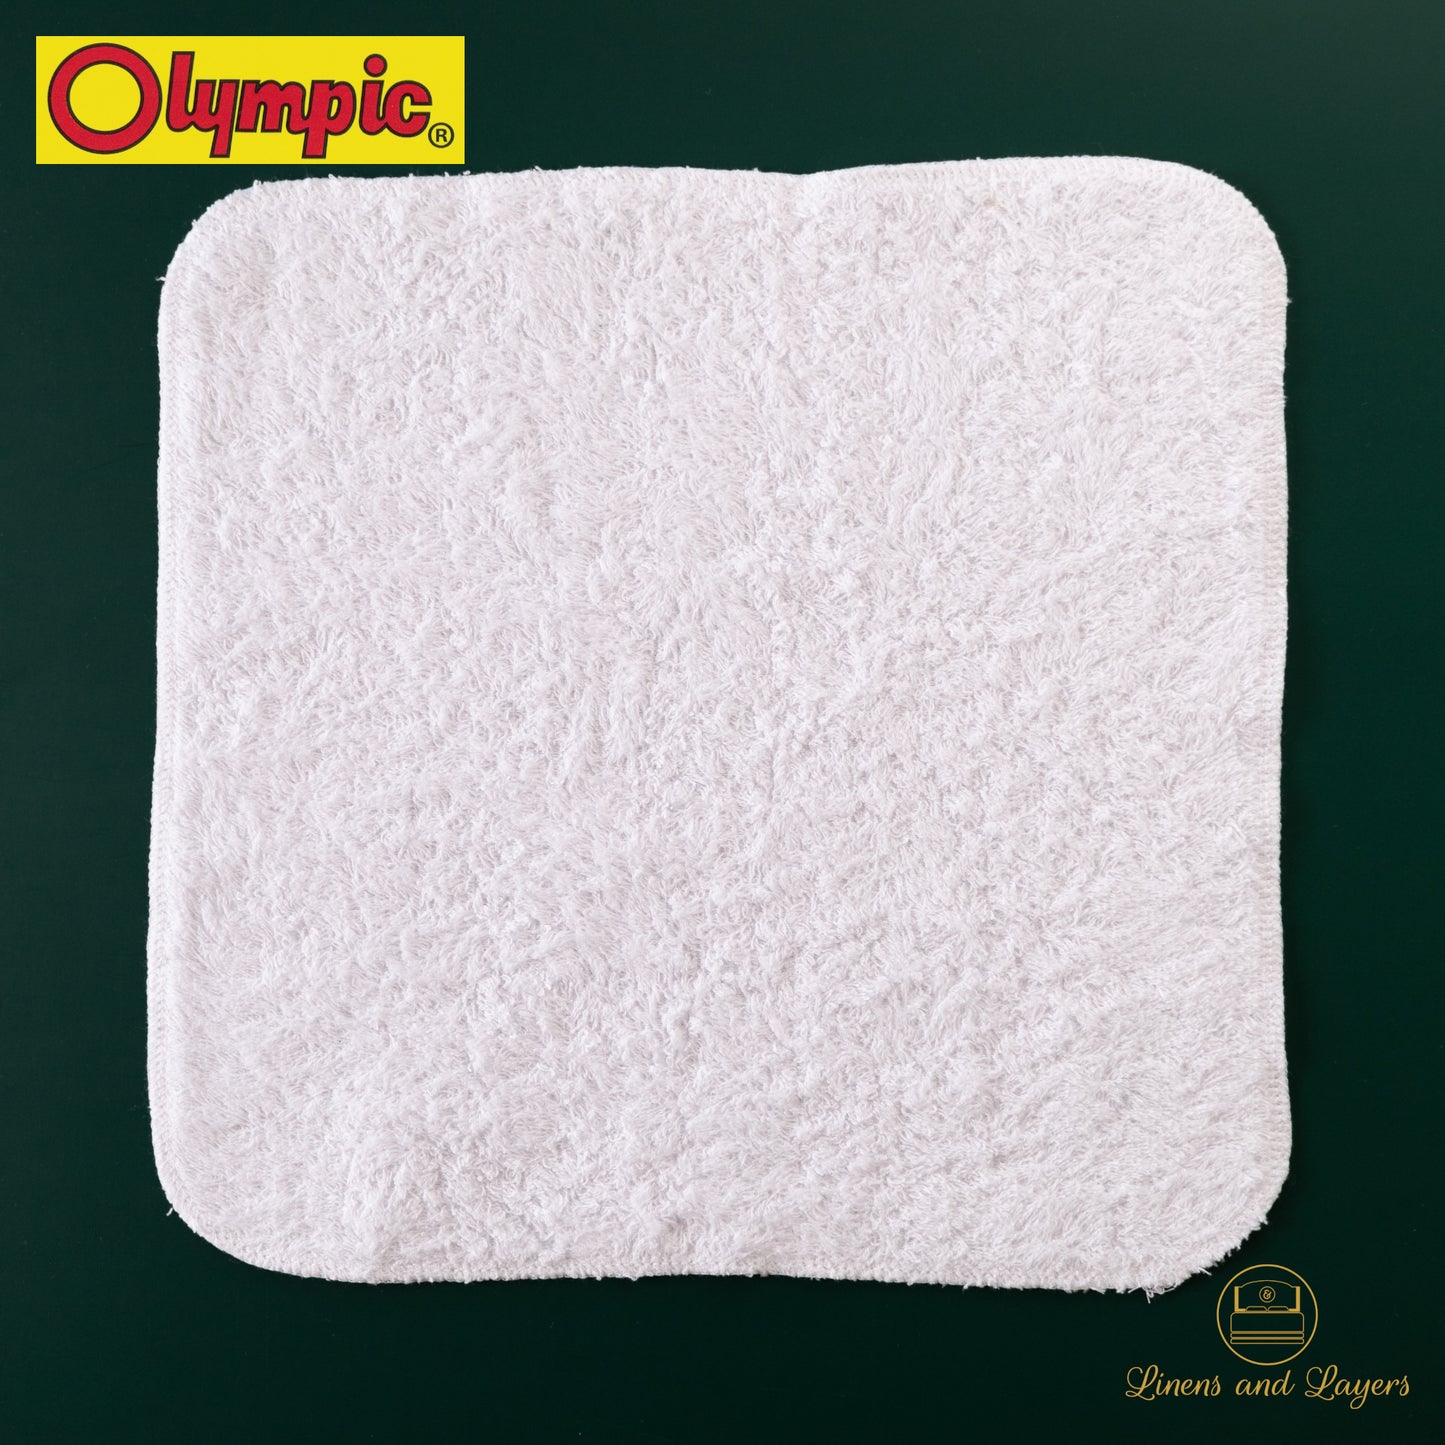 Olympic White Face Towel (448 GSM) - DK-1111 (11x11 inches)